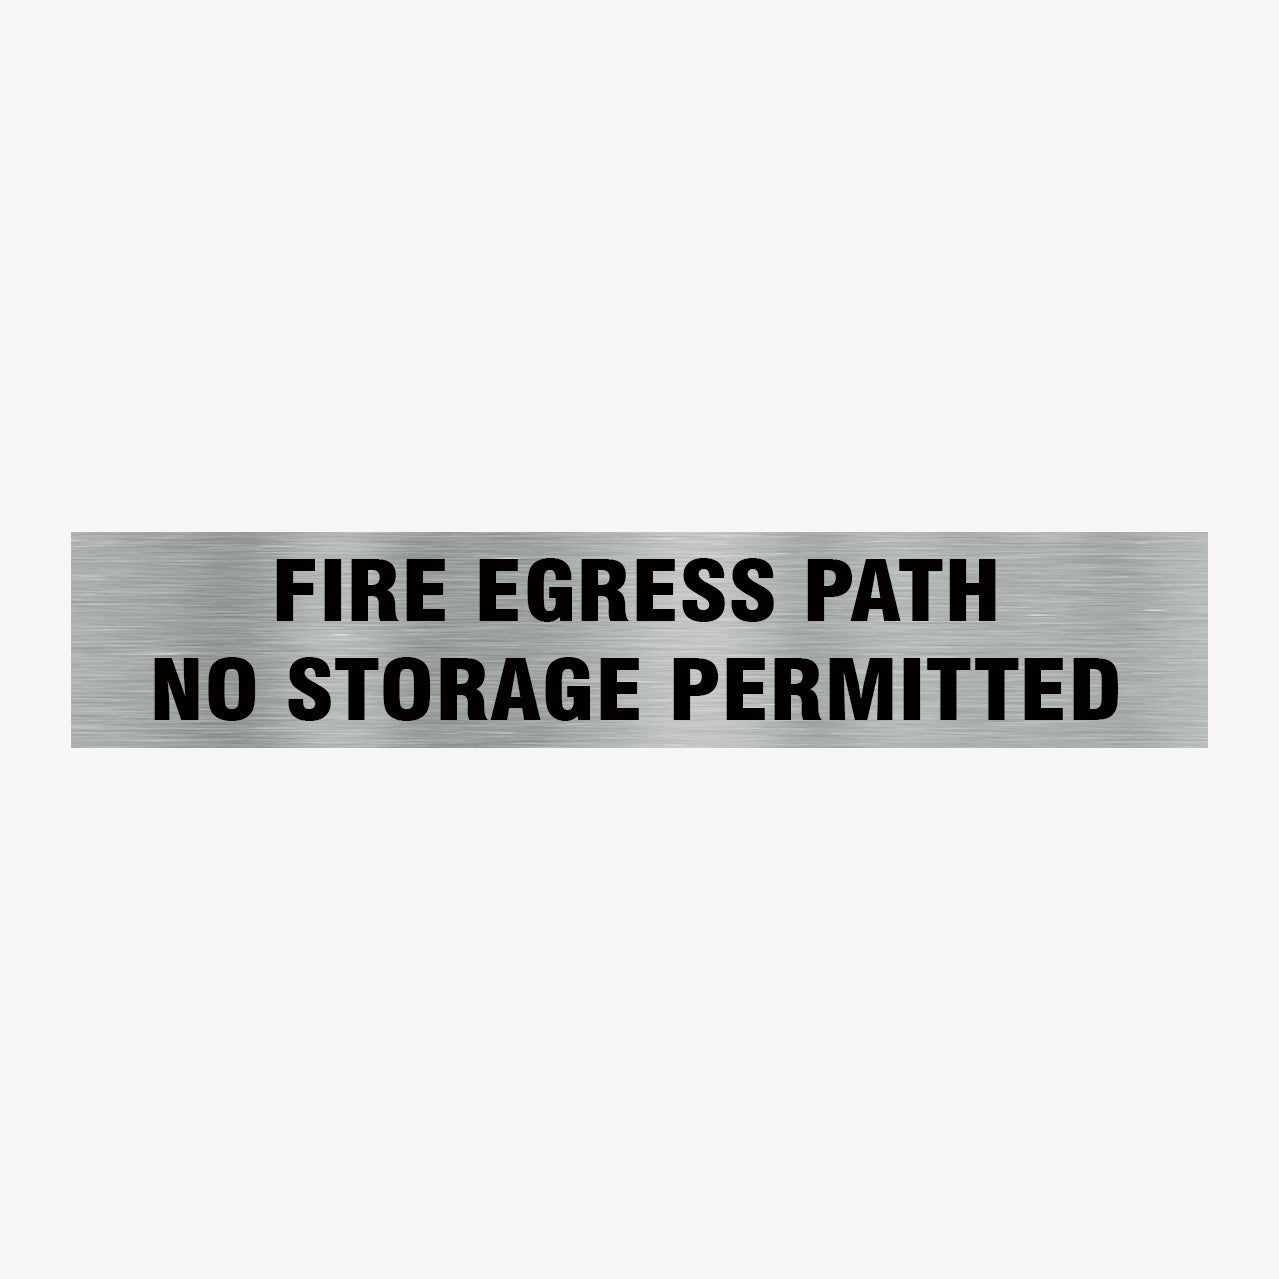 FIRE EGRESS PATH, NO STORAGE PERMITTED SIGN